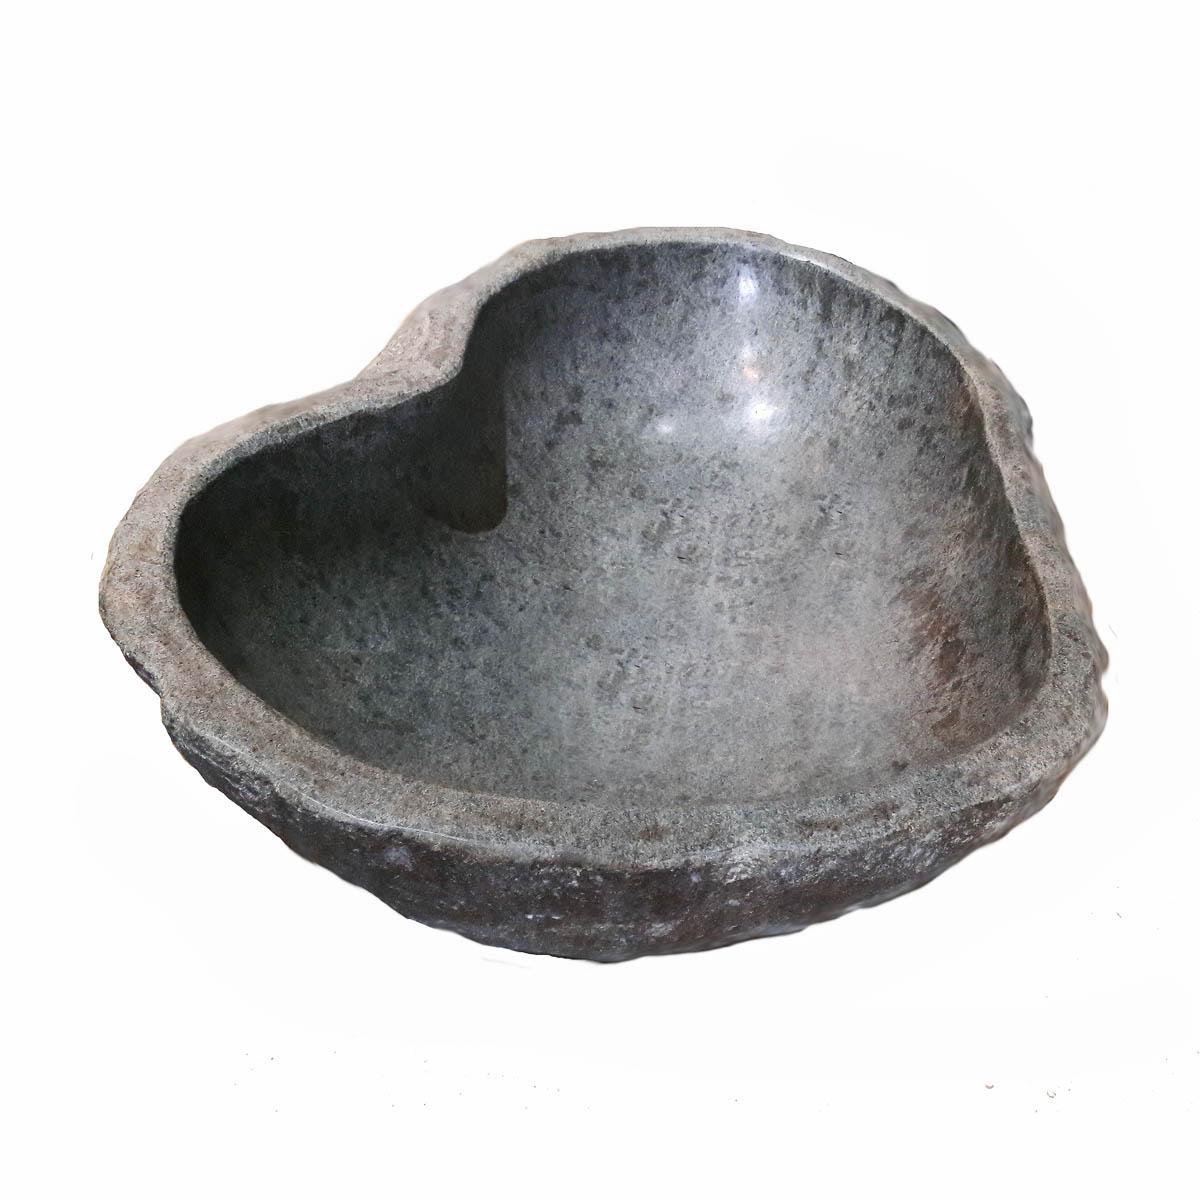 A river stone basin with polished inside, hand-carved in Indonesia. Contemporary. 
With a 4.75-inch depth at the bottom, it can easily convert to a wash sink (professional conversion suggested)

Great addition to a garden, patio, or a